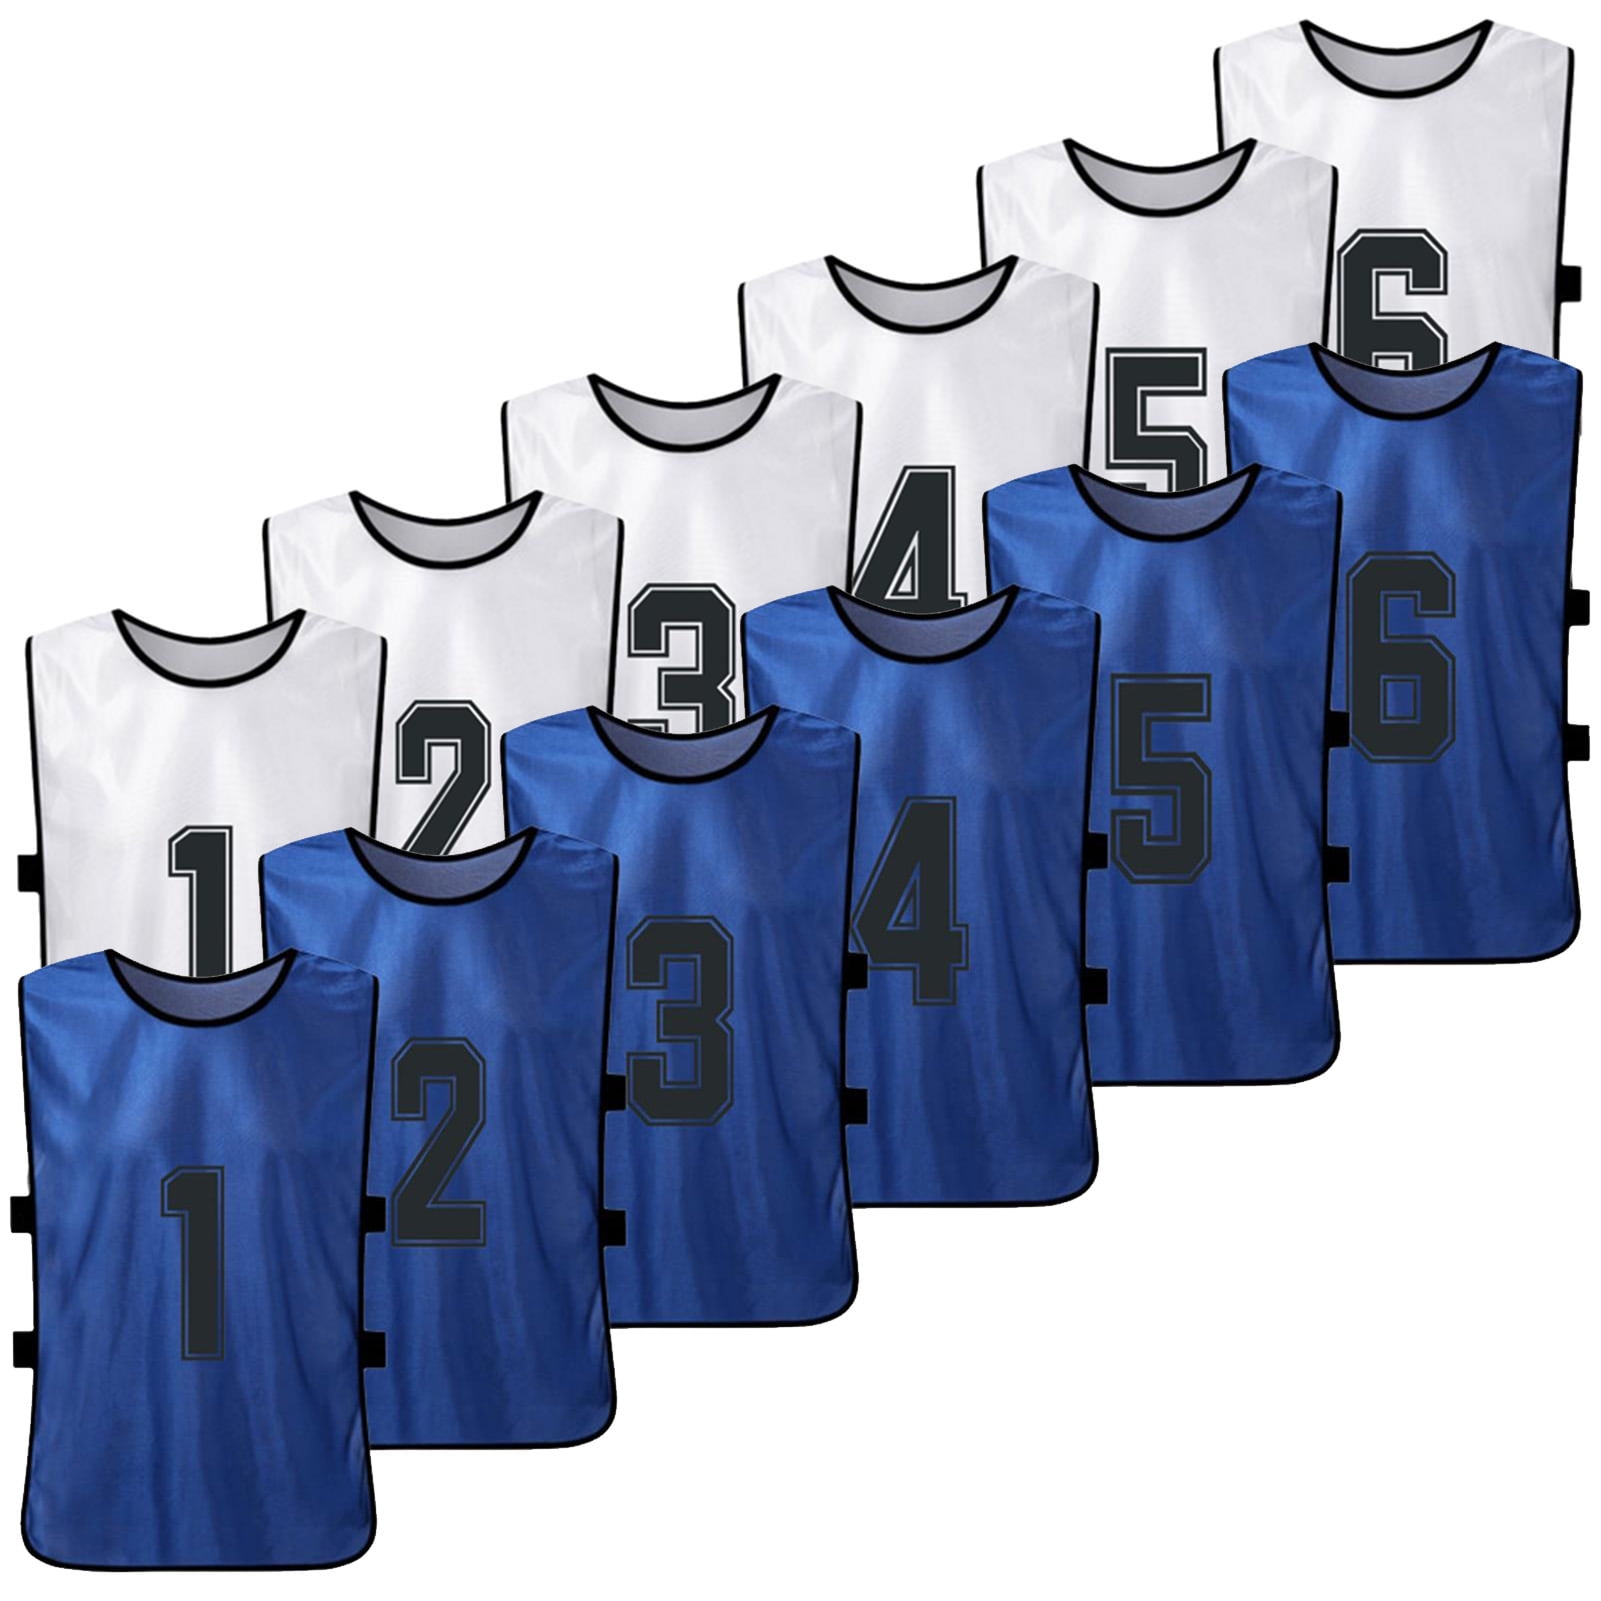 12 PCS Adults Soccer Pinnies Quick Drying Football Team Jerseys Youth Sport Game 